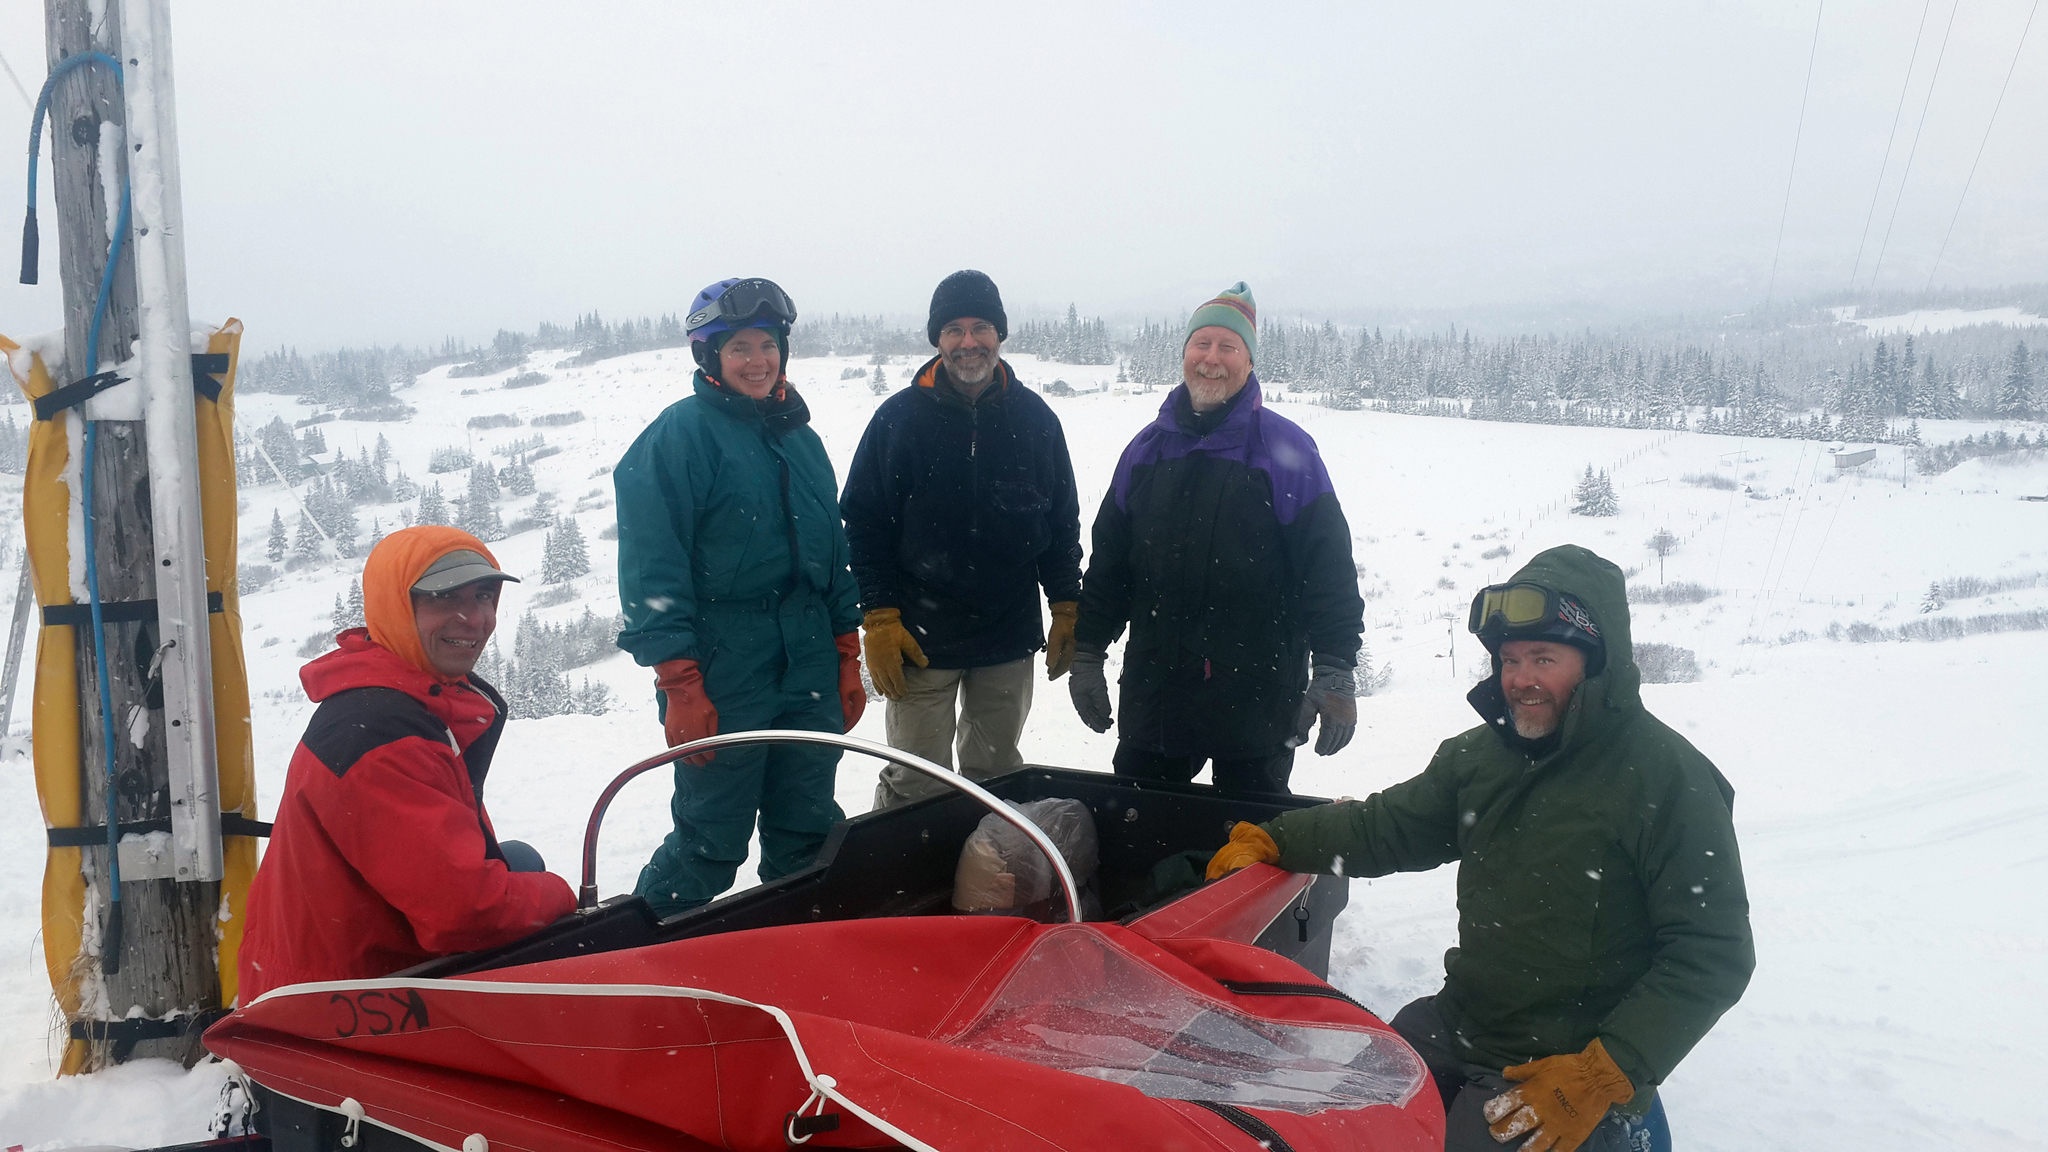 Photo provided Kachemak Ski Club members do rescue training on Sunday at the Homer Rope Tow on Ohlson Mountain. Participating were, from left to right, Doug Reid, Karen Northrup, KSC President Dr. Randy Wiest, Rope Tow inspector and drill instructor Bill Morse and “victim” Patrick Houlihan.